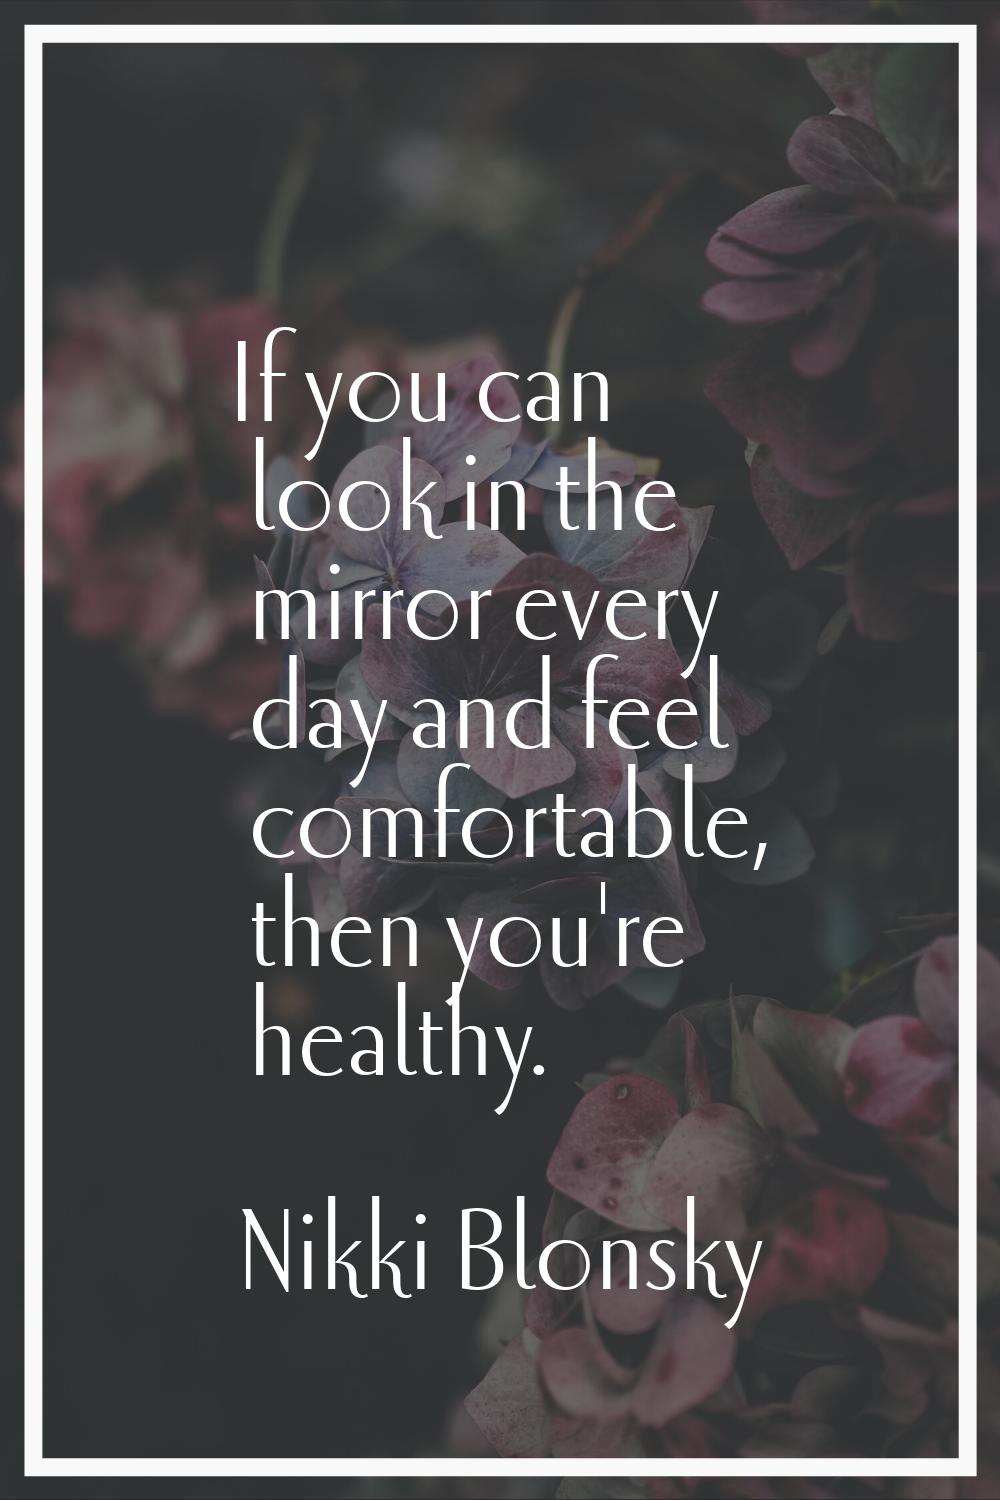 If you can look in the mirror every day and feel comfortable, then you're healthy.